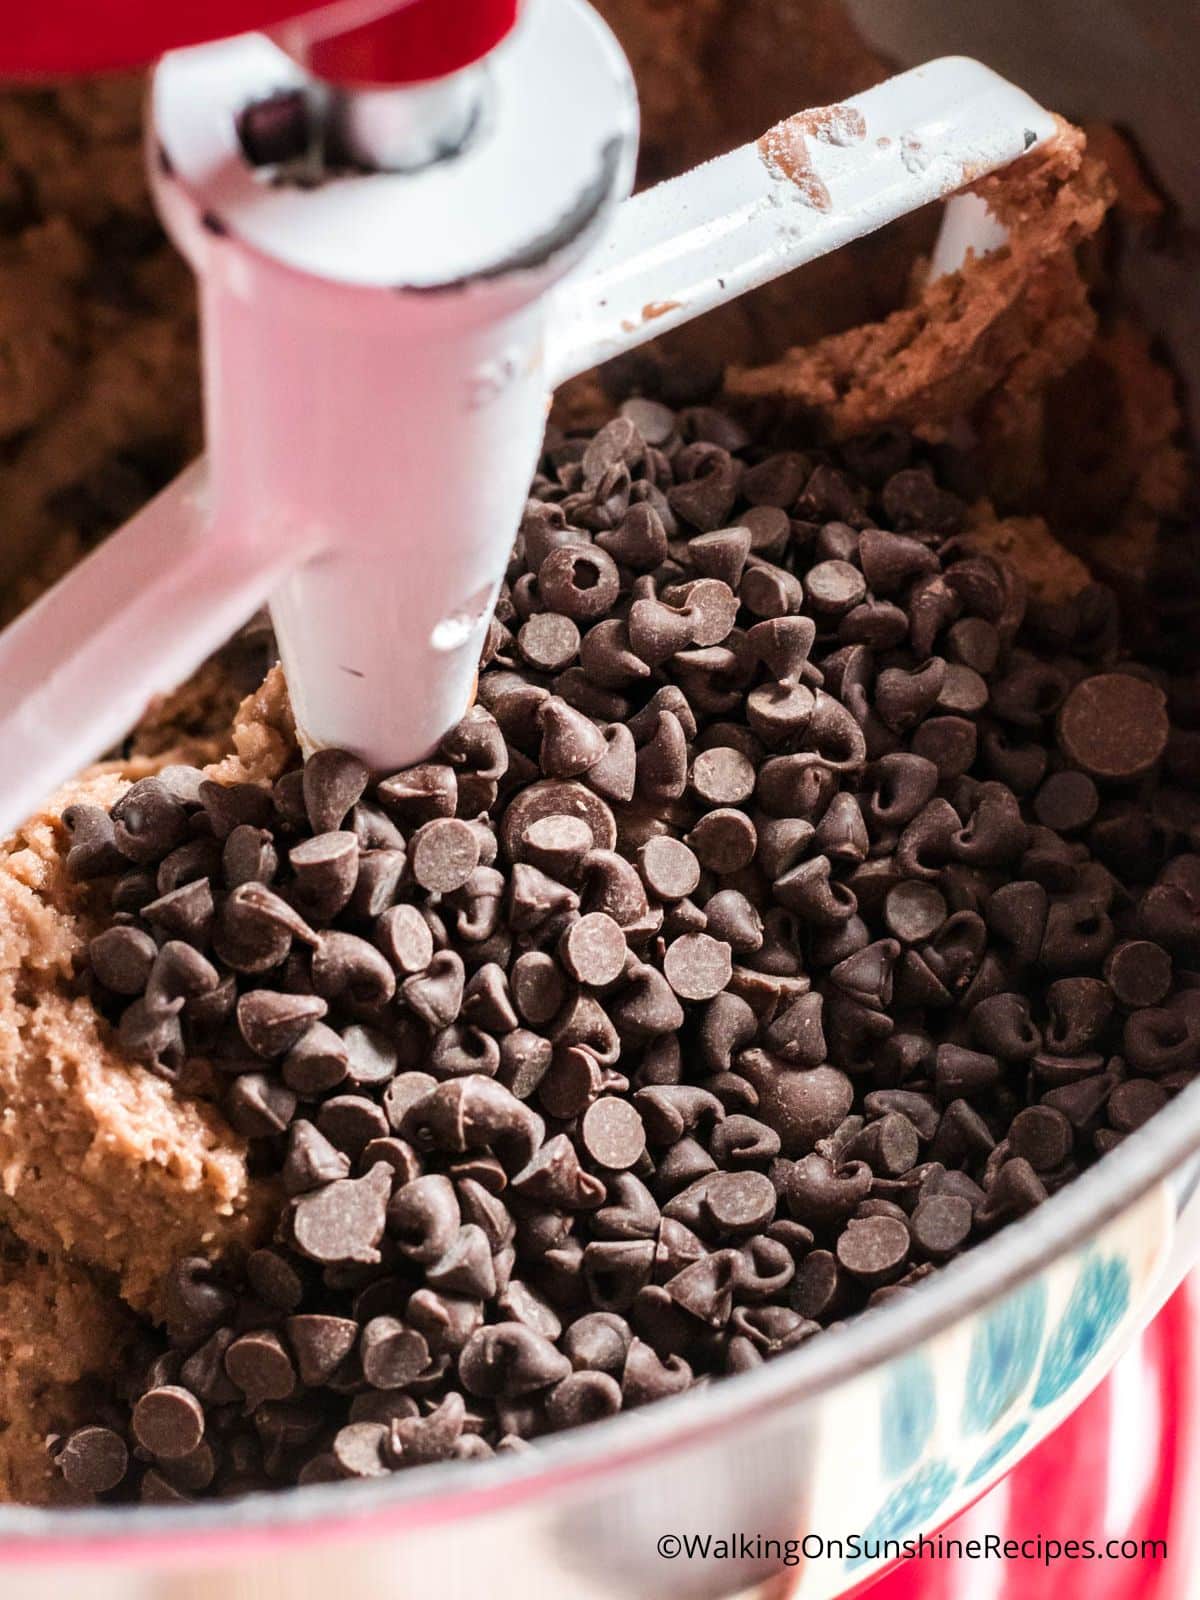 Add chocolate chips to cookie batter.